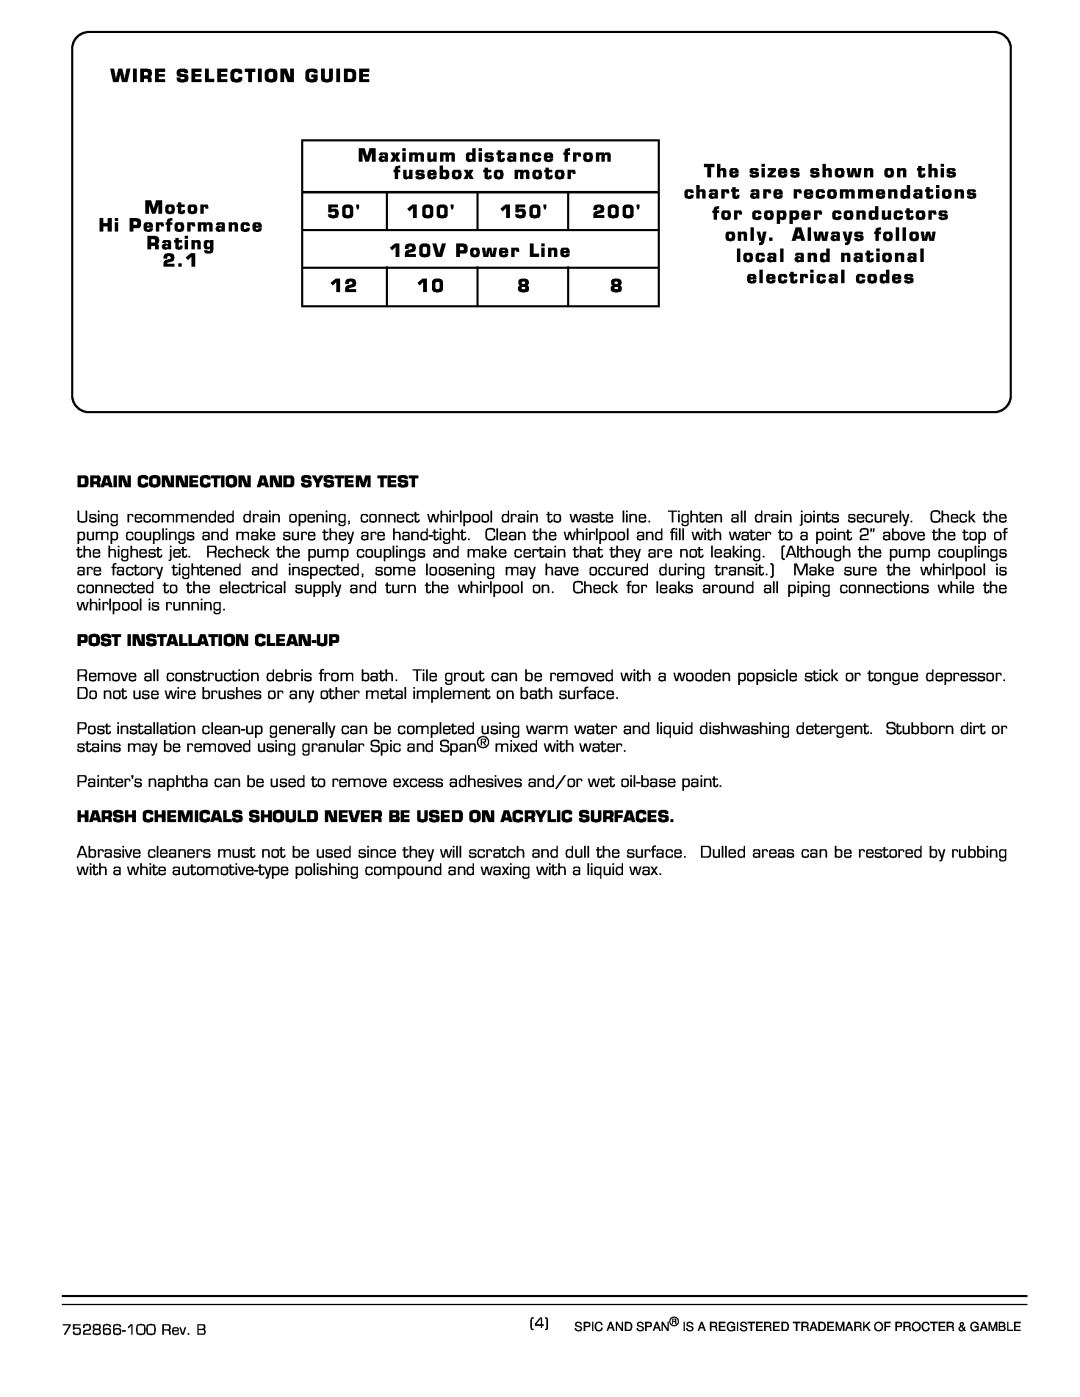 American Standard 2902E installation instructions Wire Selection Guide 